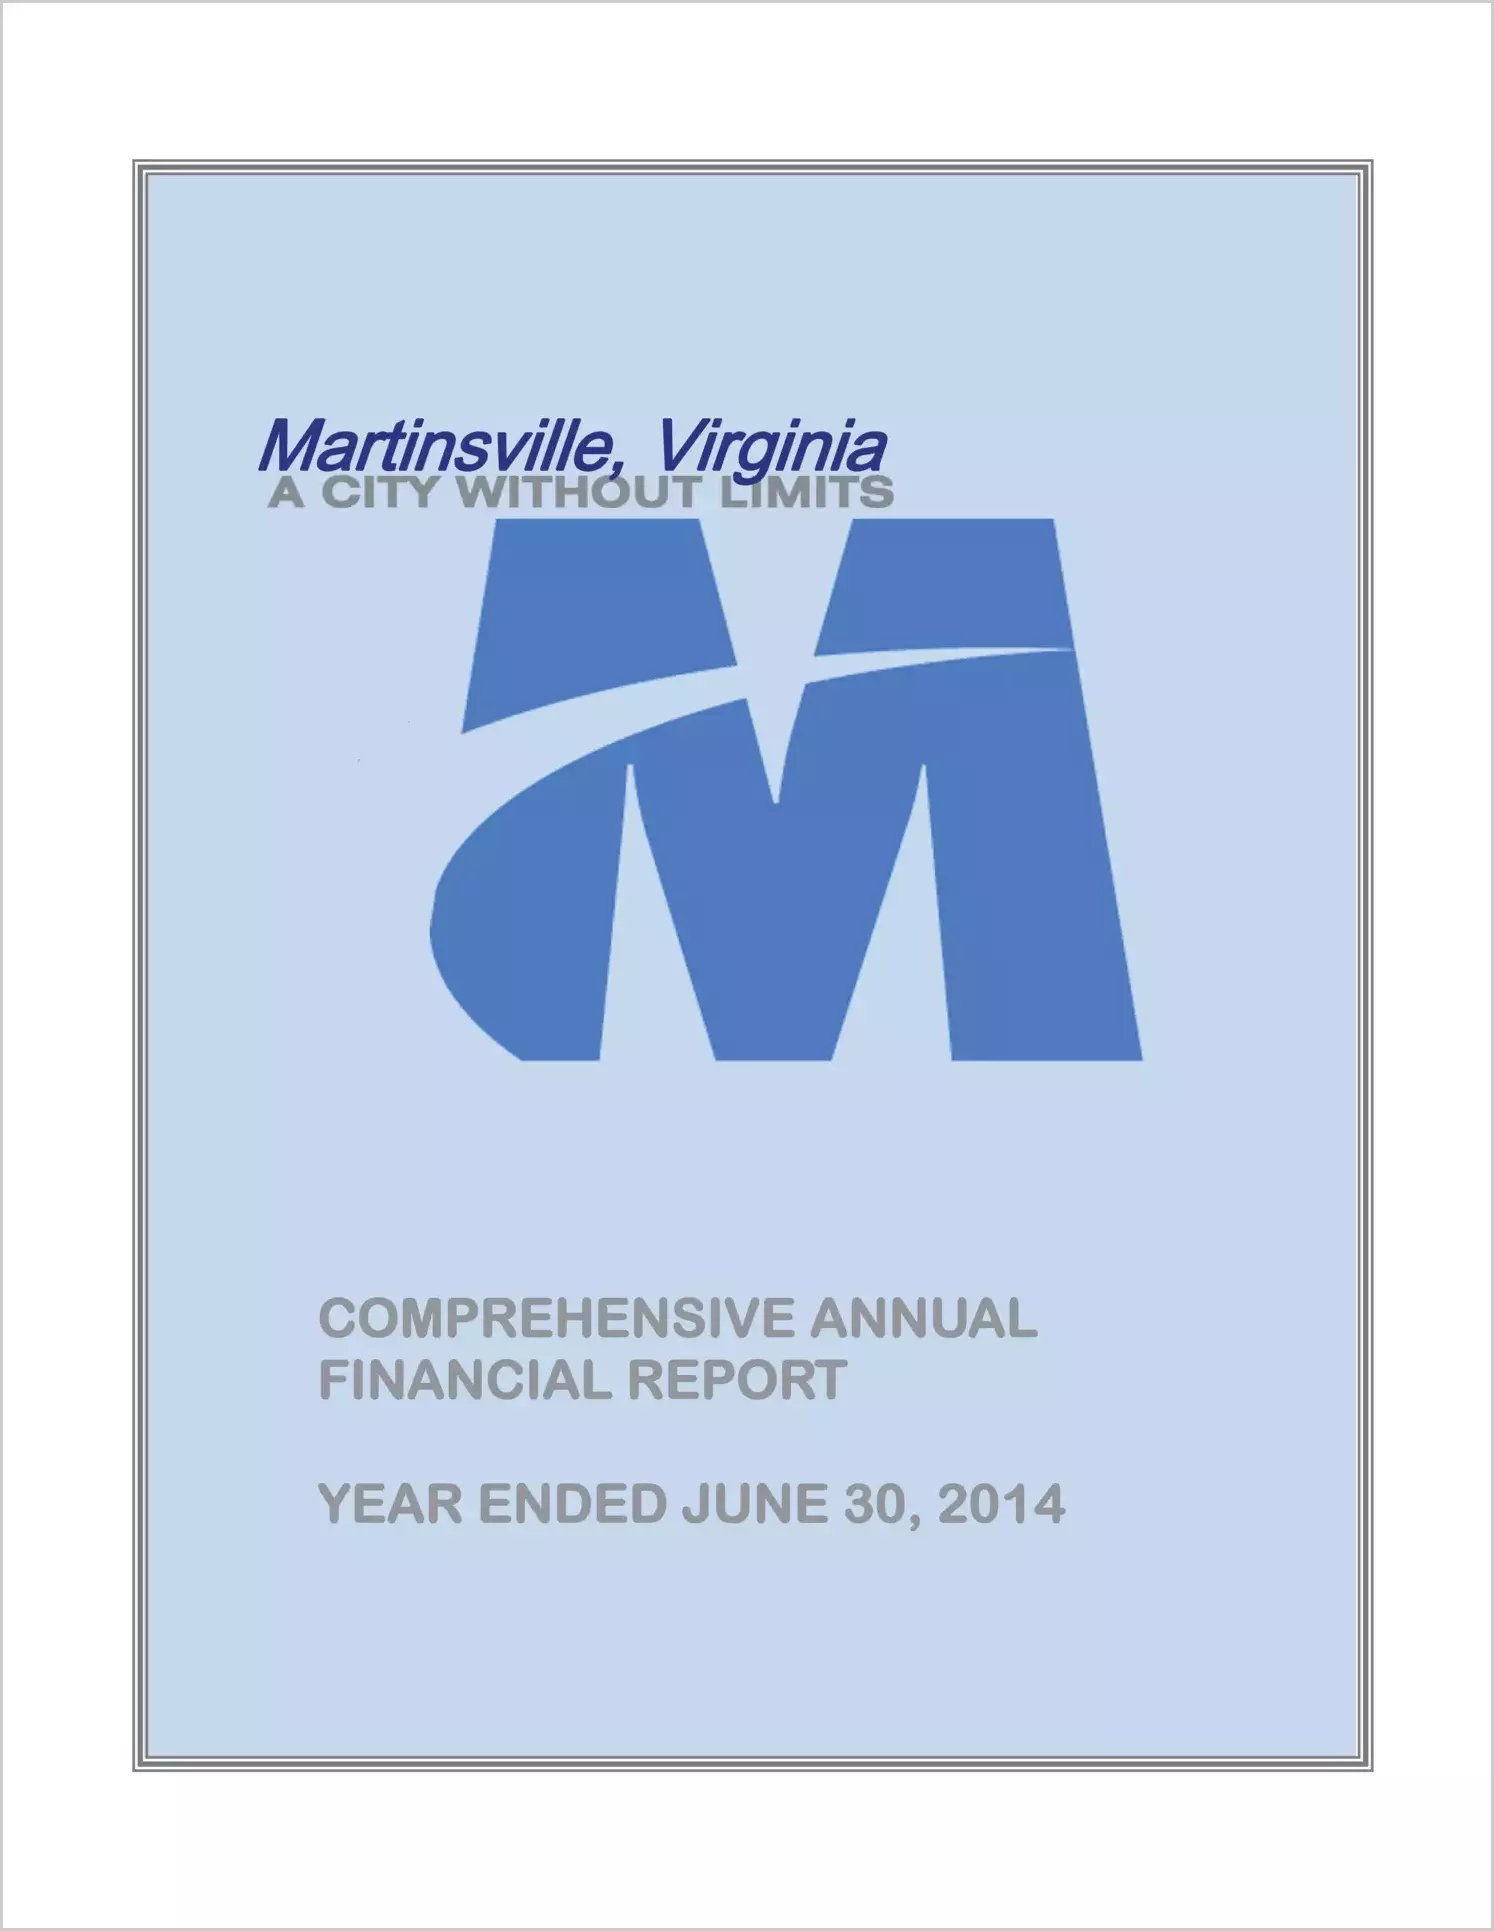 2014 Annual Financial Report for City of Martinsville